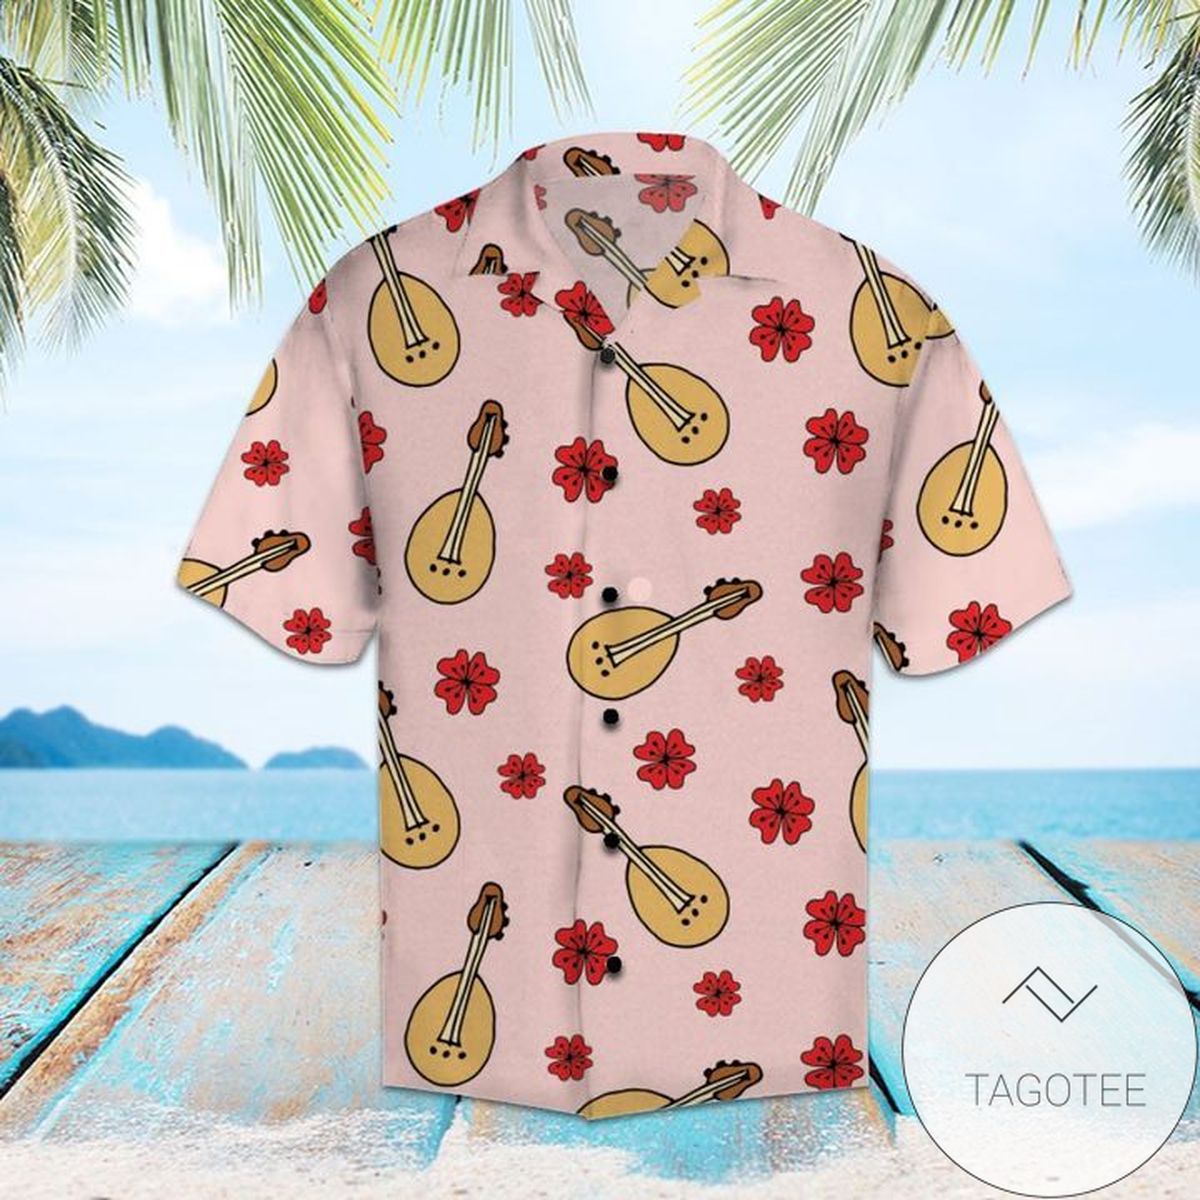 Amazing Ukulele 3d Hawaiian Shirt For Men With Vibrant Colors And Textures